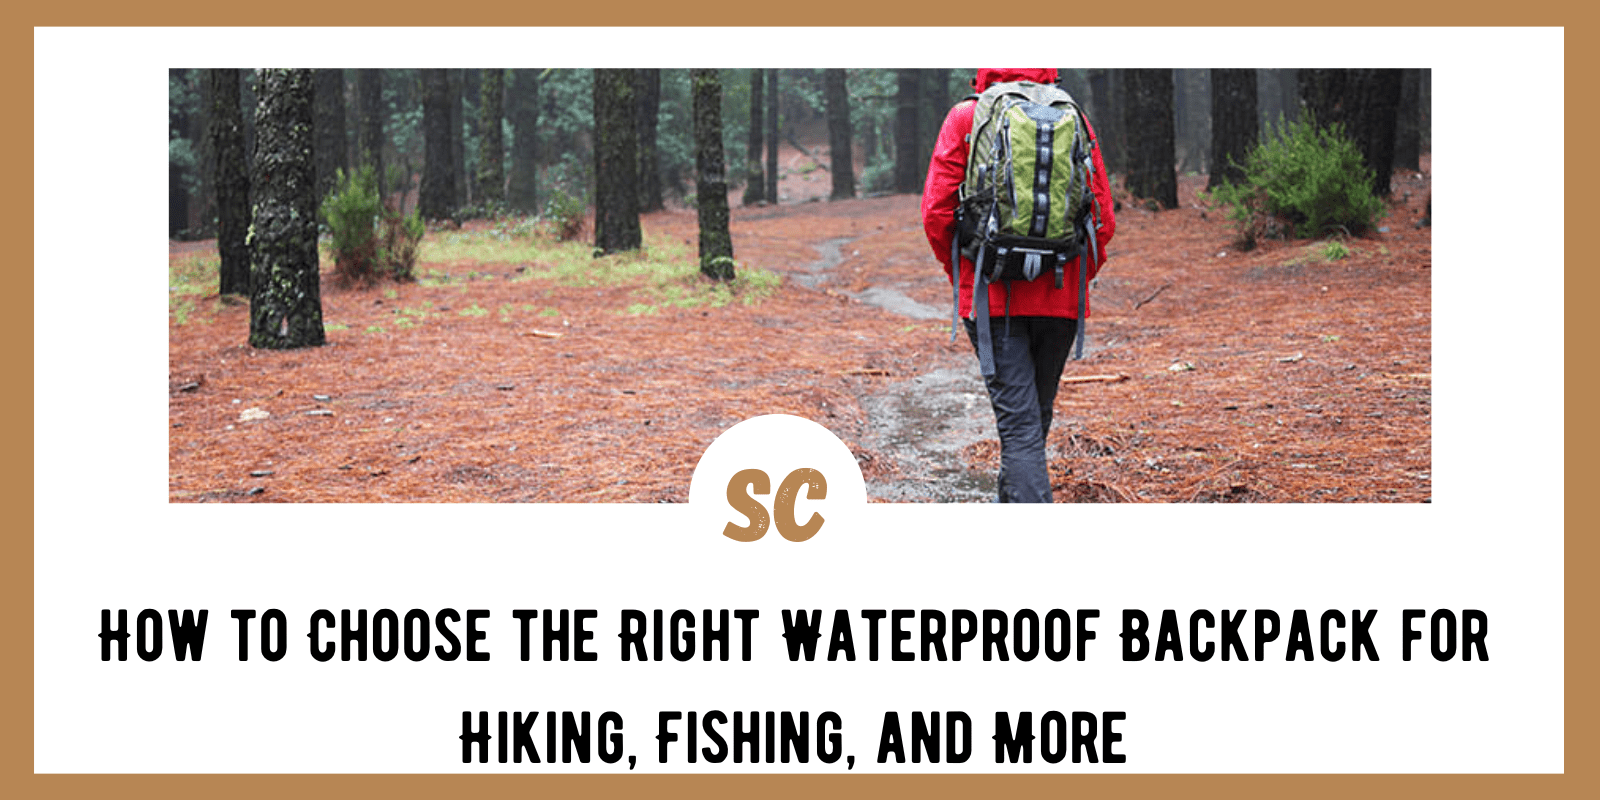 How to Choose the Right Waterproof Backpack for Hiking, Fishing, and More